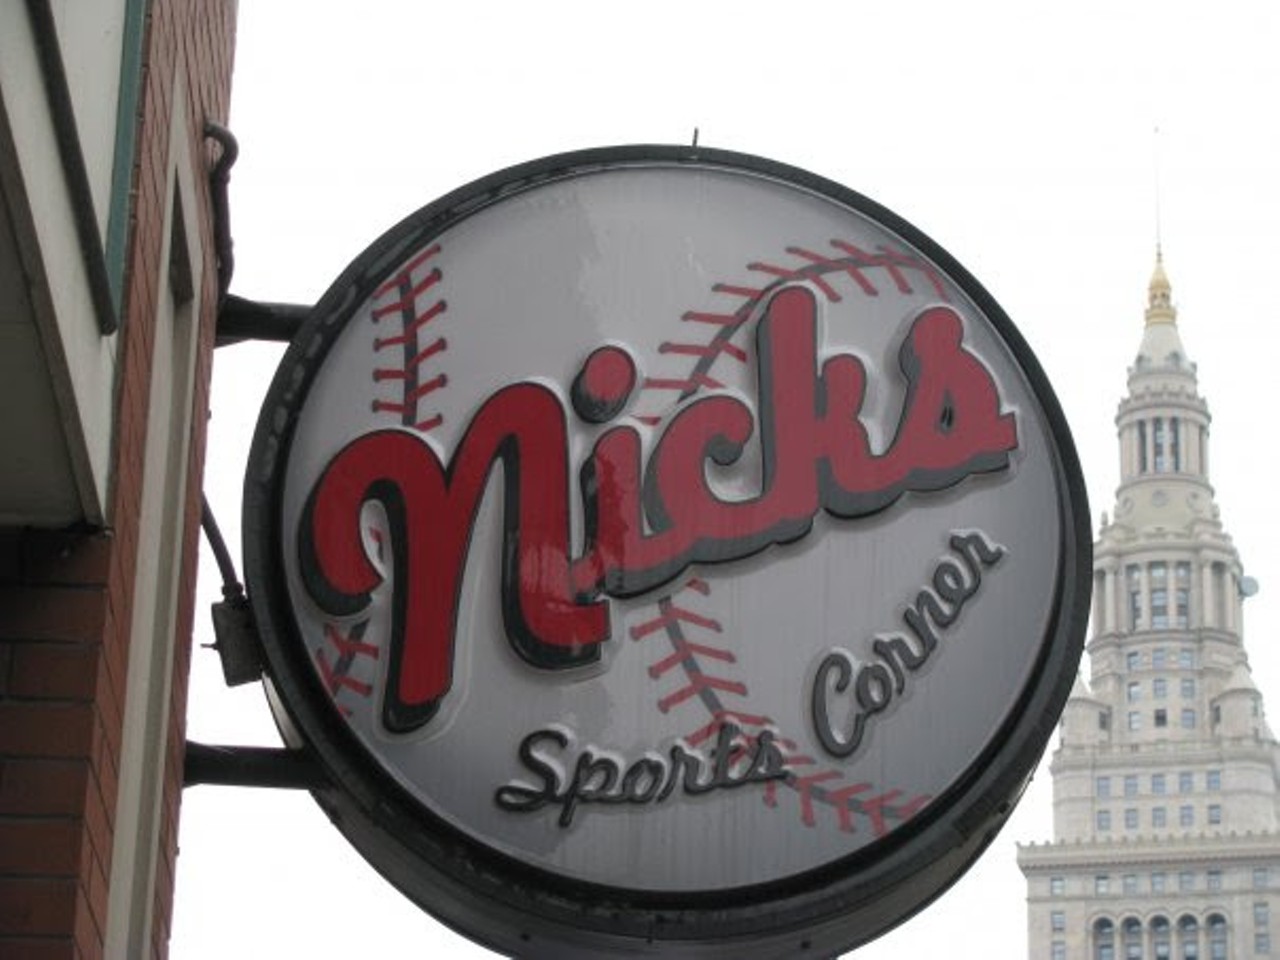 20 Places to Eat, Drink, and Be Merry in Cleveland on Opening Day